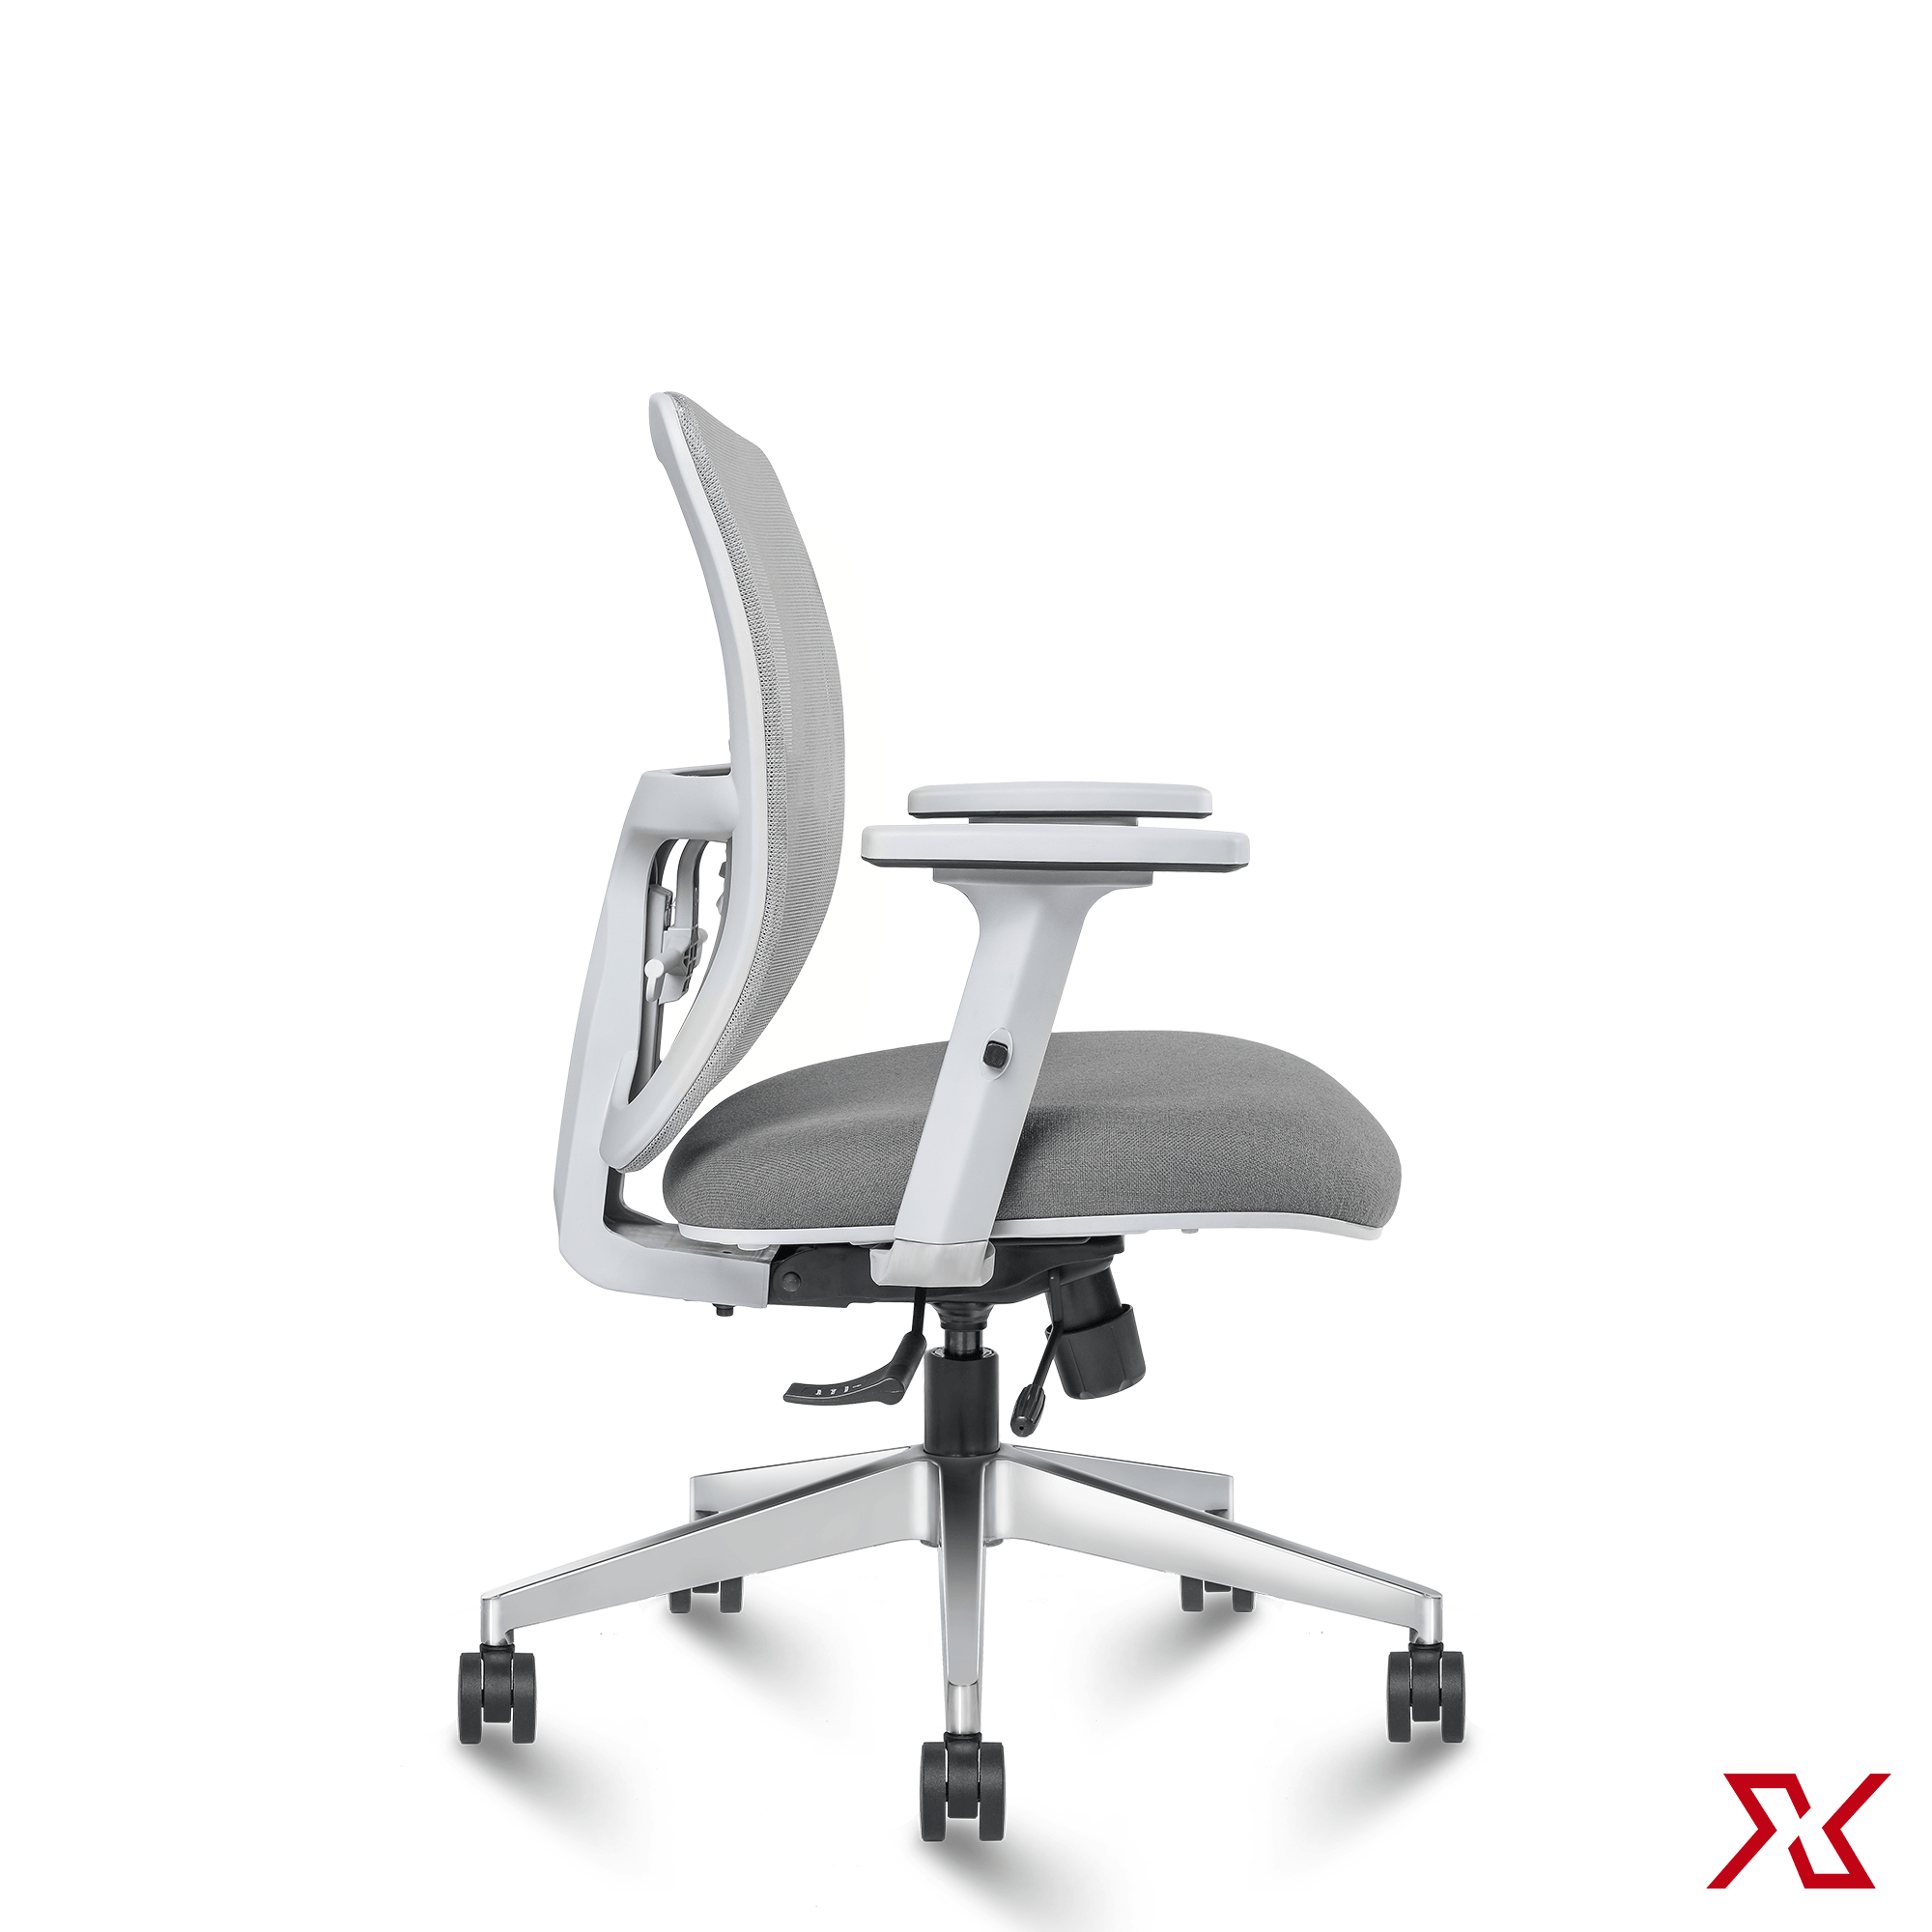 STORM Medium Back (Grey Chair) - Exclusiff Seating Sytems